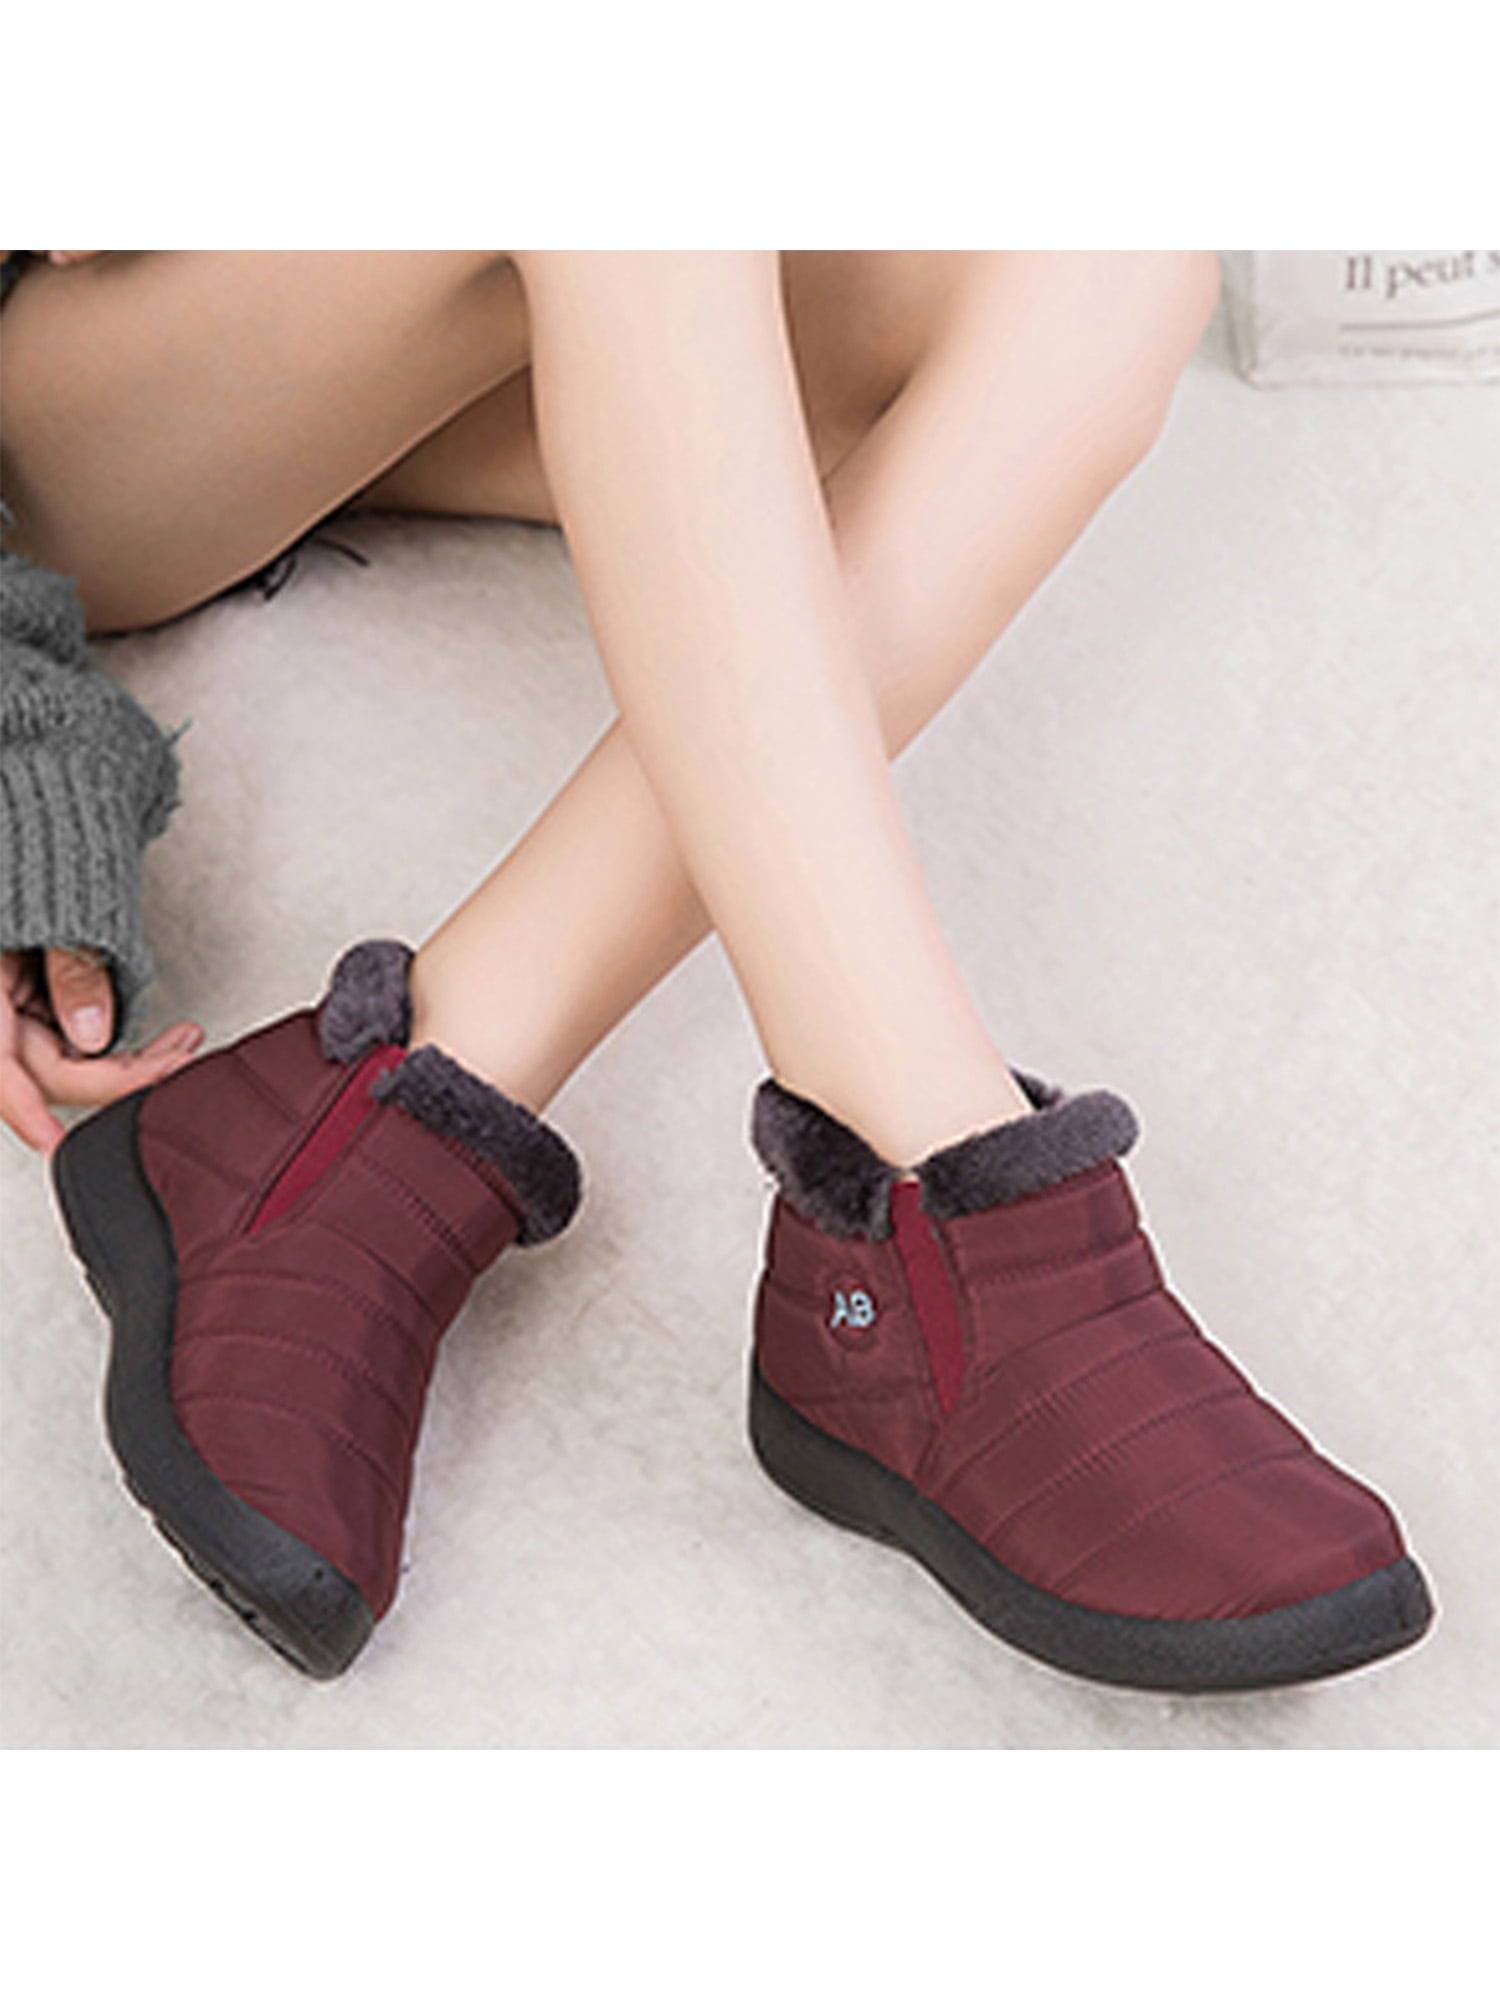 Women's Winter Warm Casual Fur Lined Ankle Boots Snow Boots Shoes Waterproof 